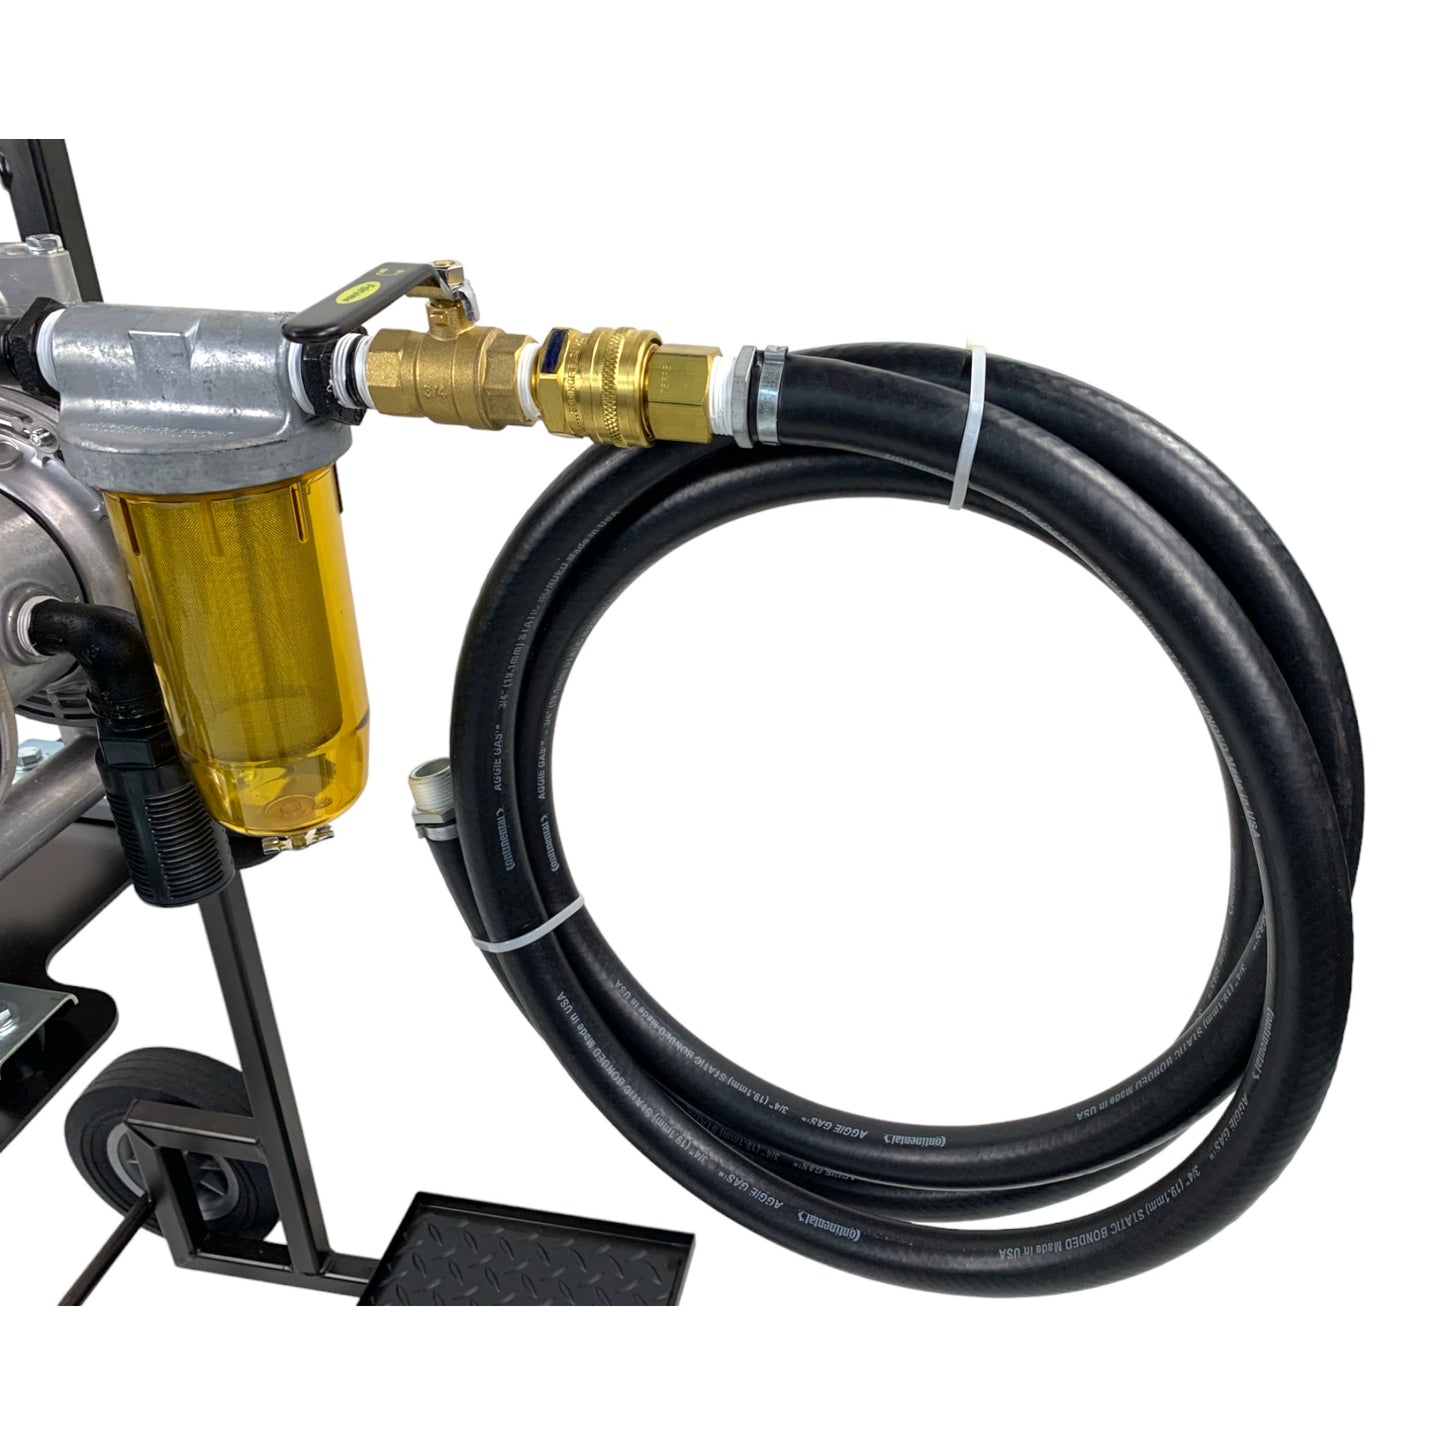 WEN101TS - Gas Accelerator Mobile Fluid Transfer System with Heavy Duty Diaphragm Air Pump